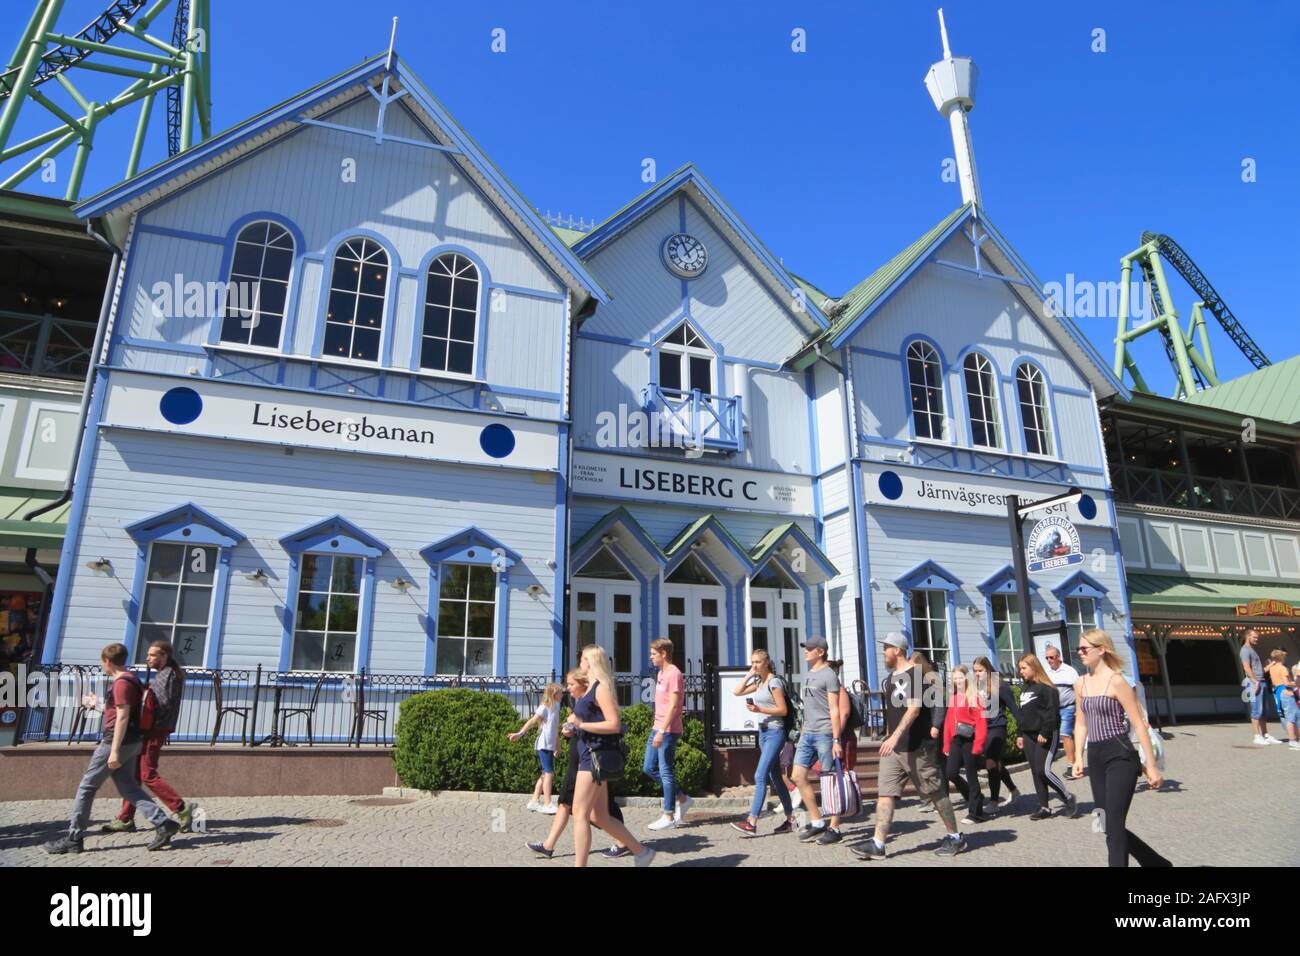 People walk past the station building and entrance to the roller coaster called Lisebergbanan in Liseberg amusement park in Gothenburg city, Sweden. Stock Photo